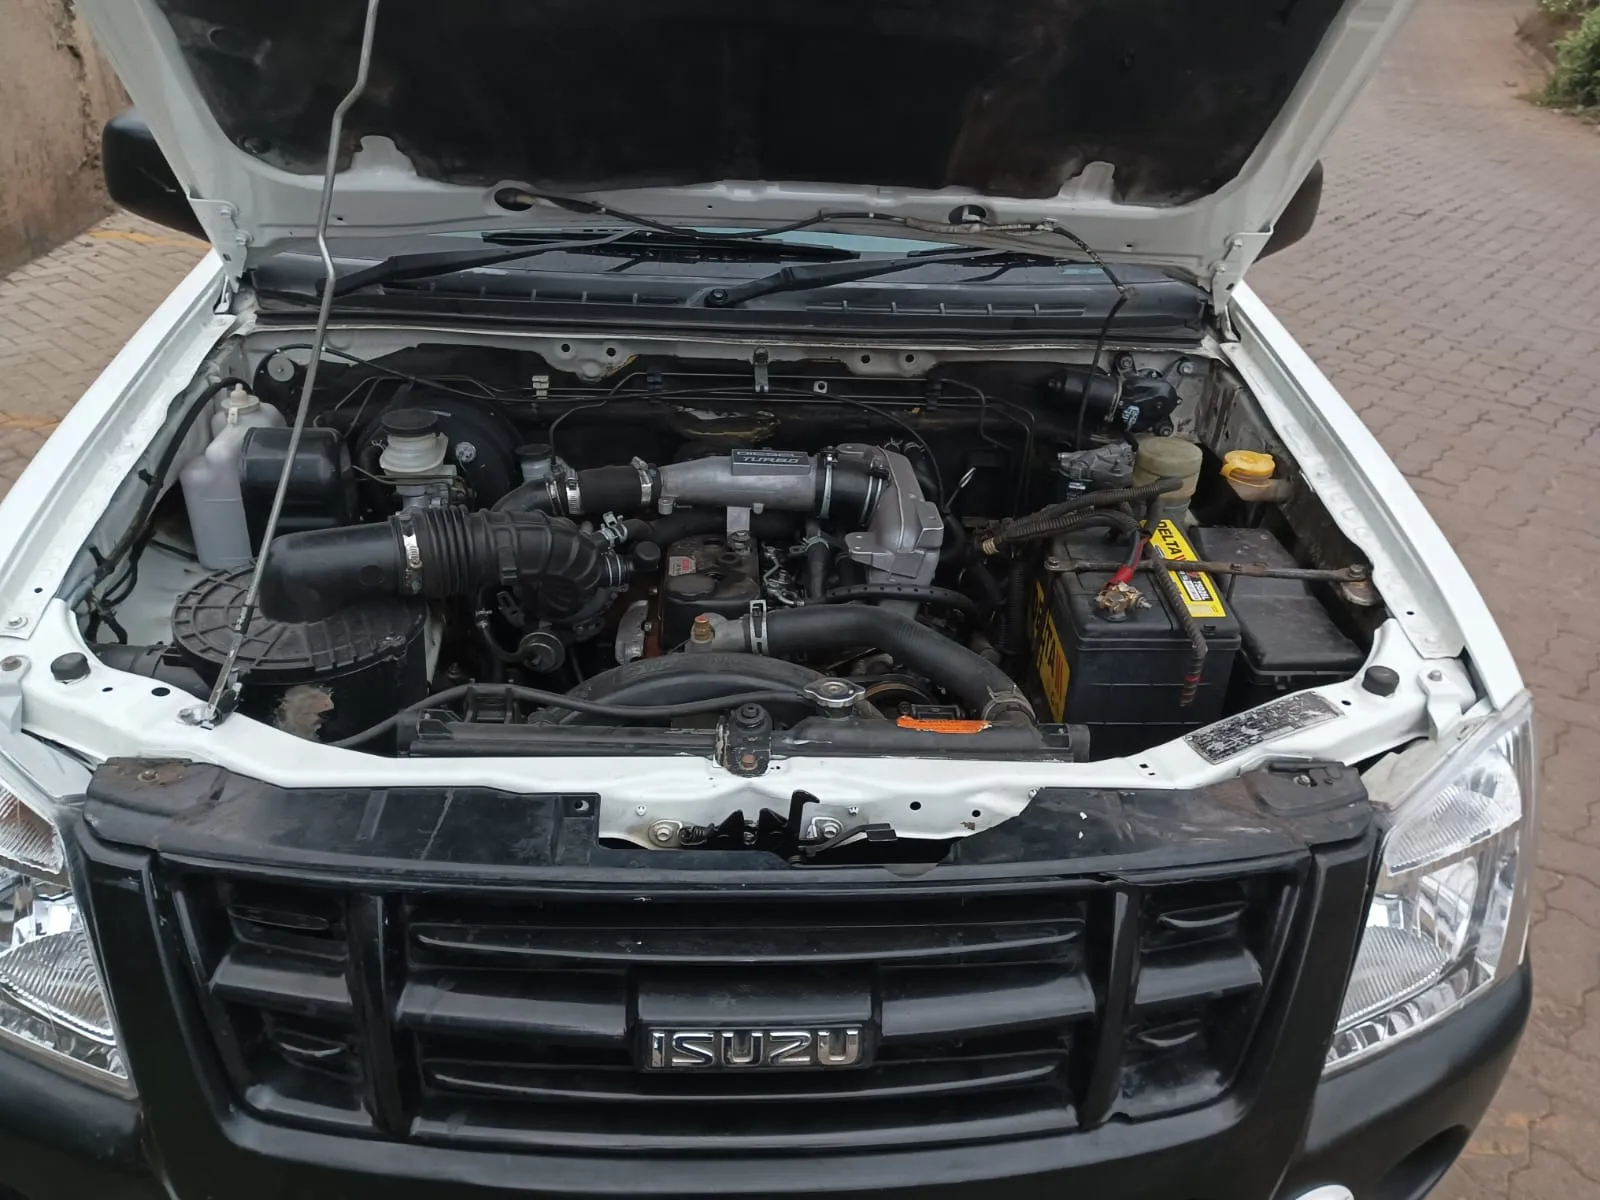 Isuzu D-MAX local 2010 You Pay 20% Deposit ONLY